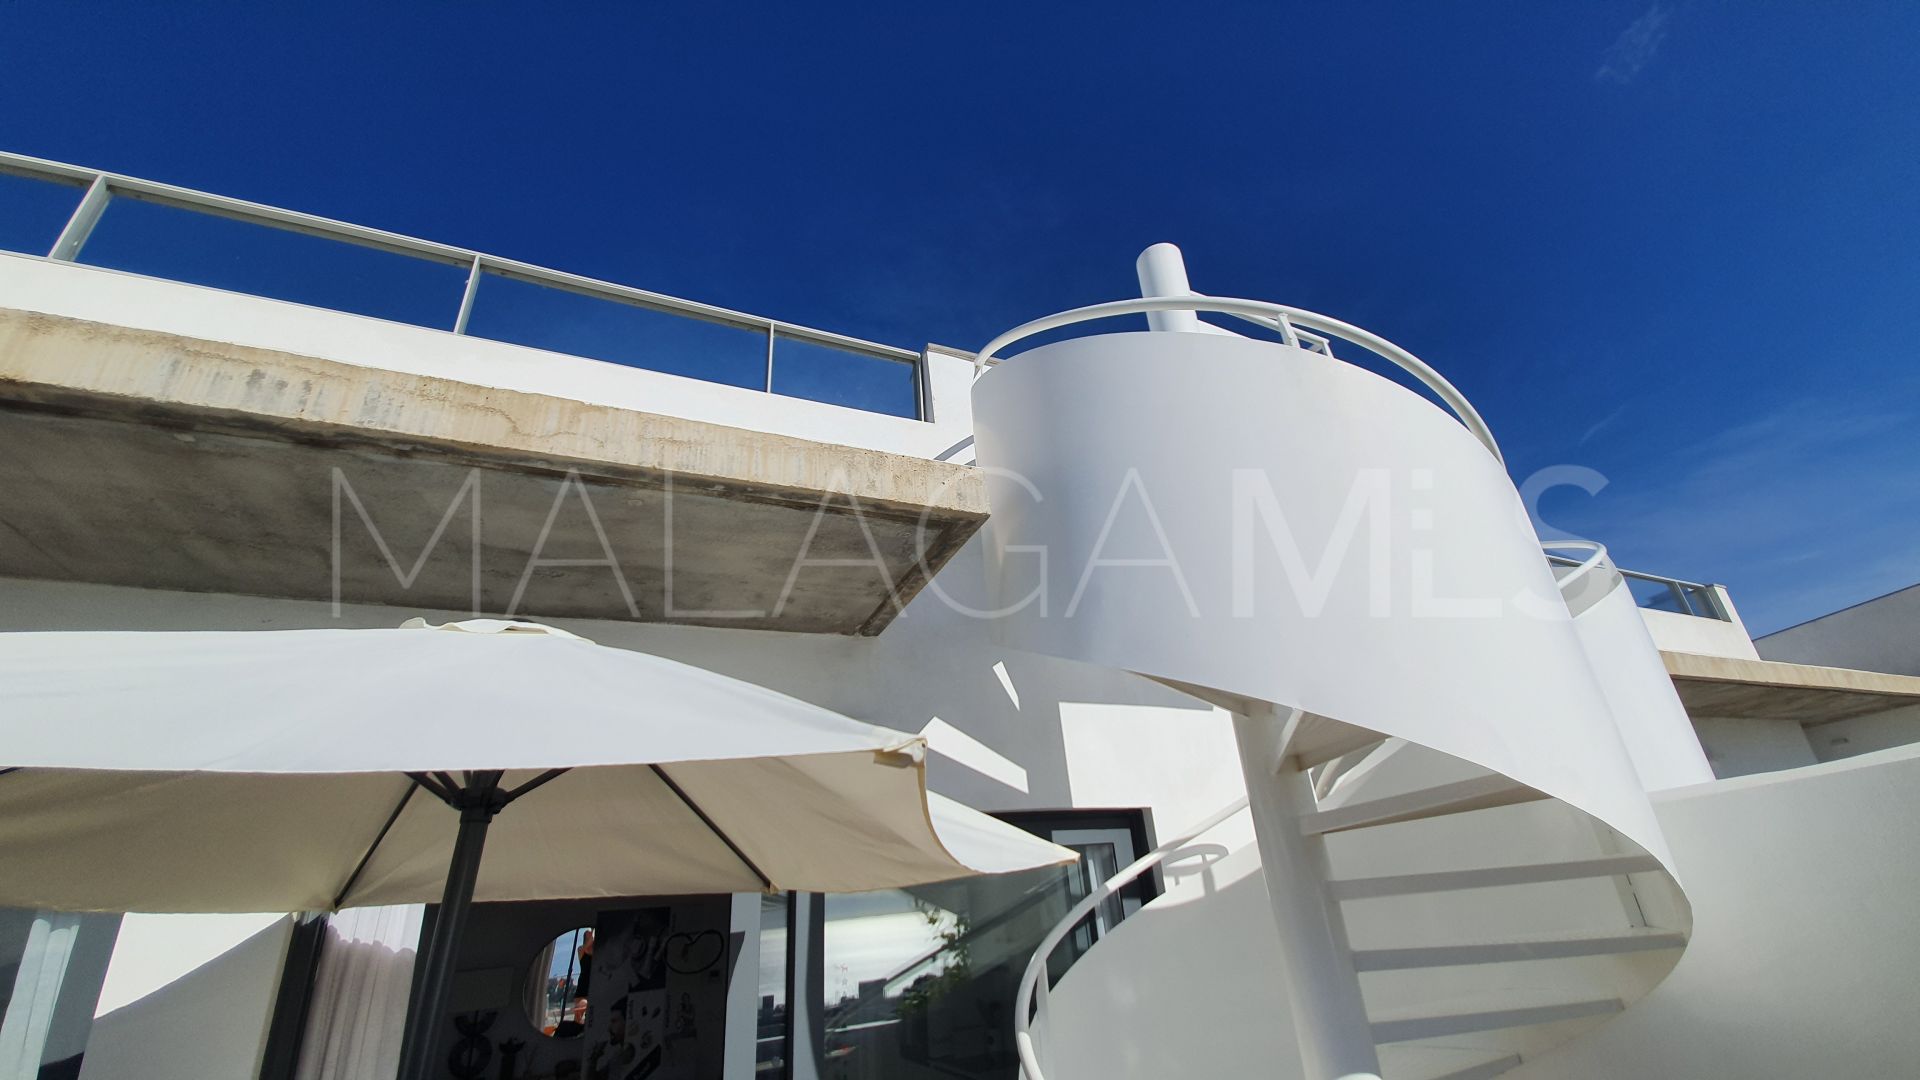 Atico for sale with 2 bedrooms in Manilva